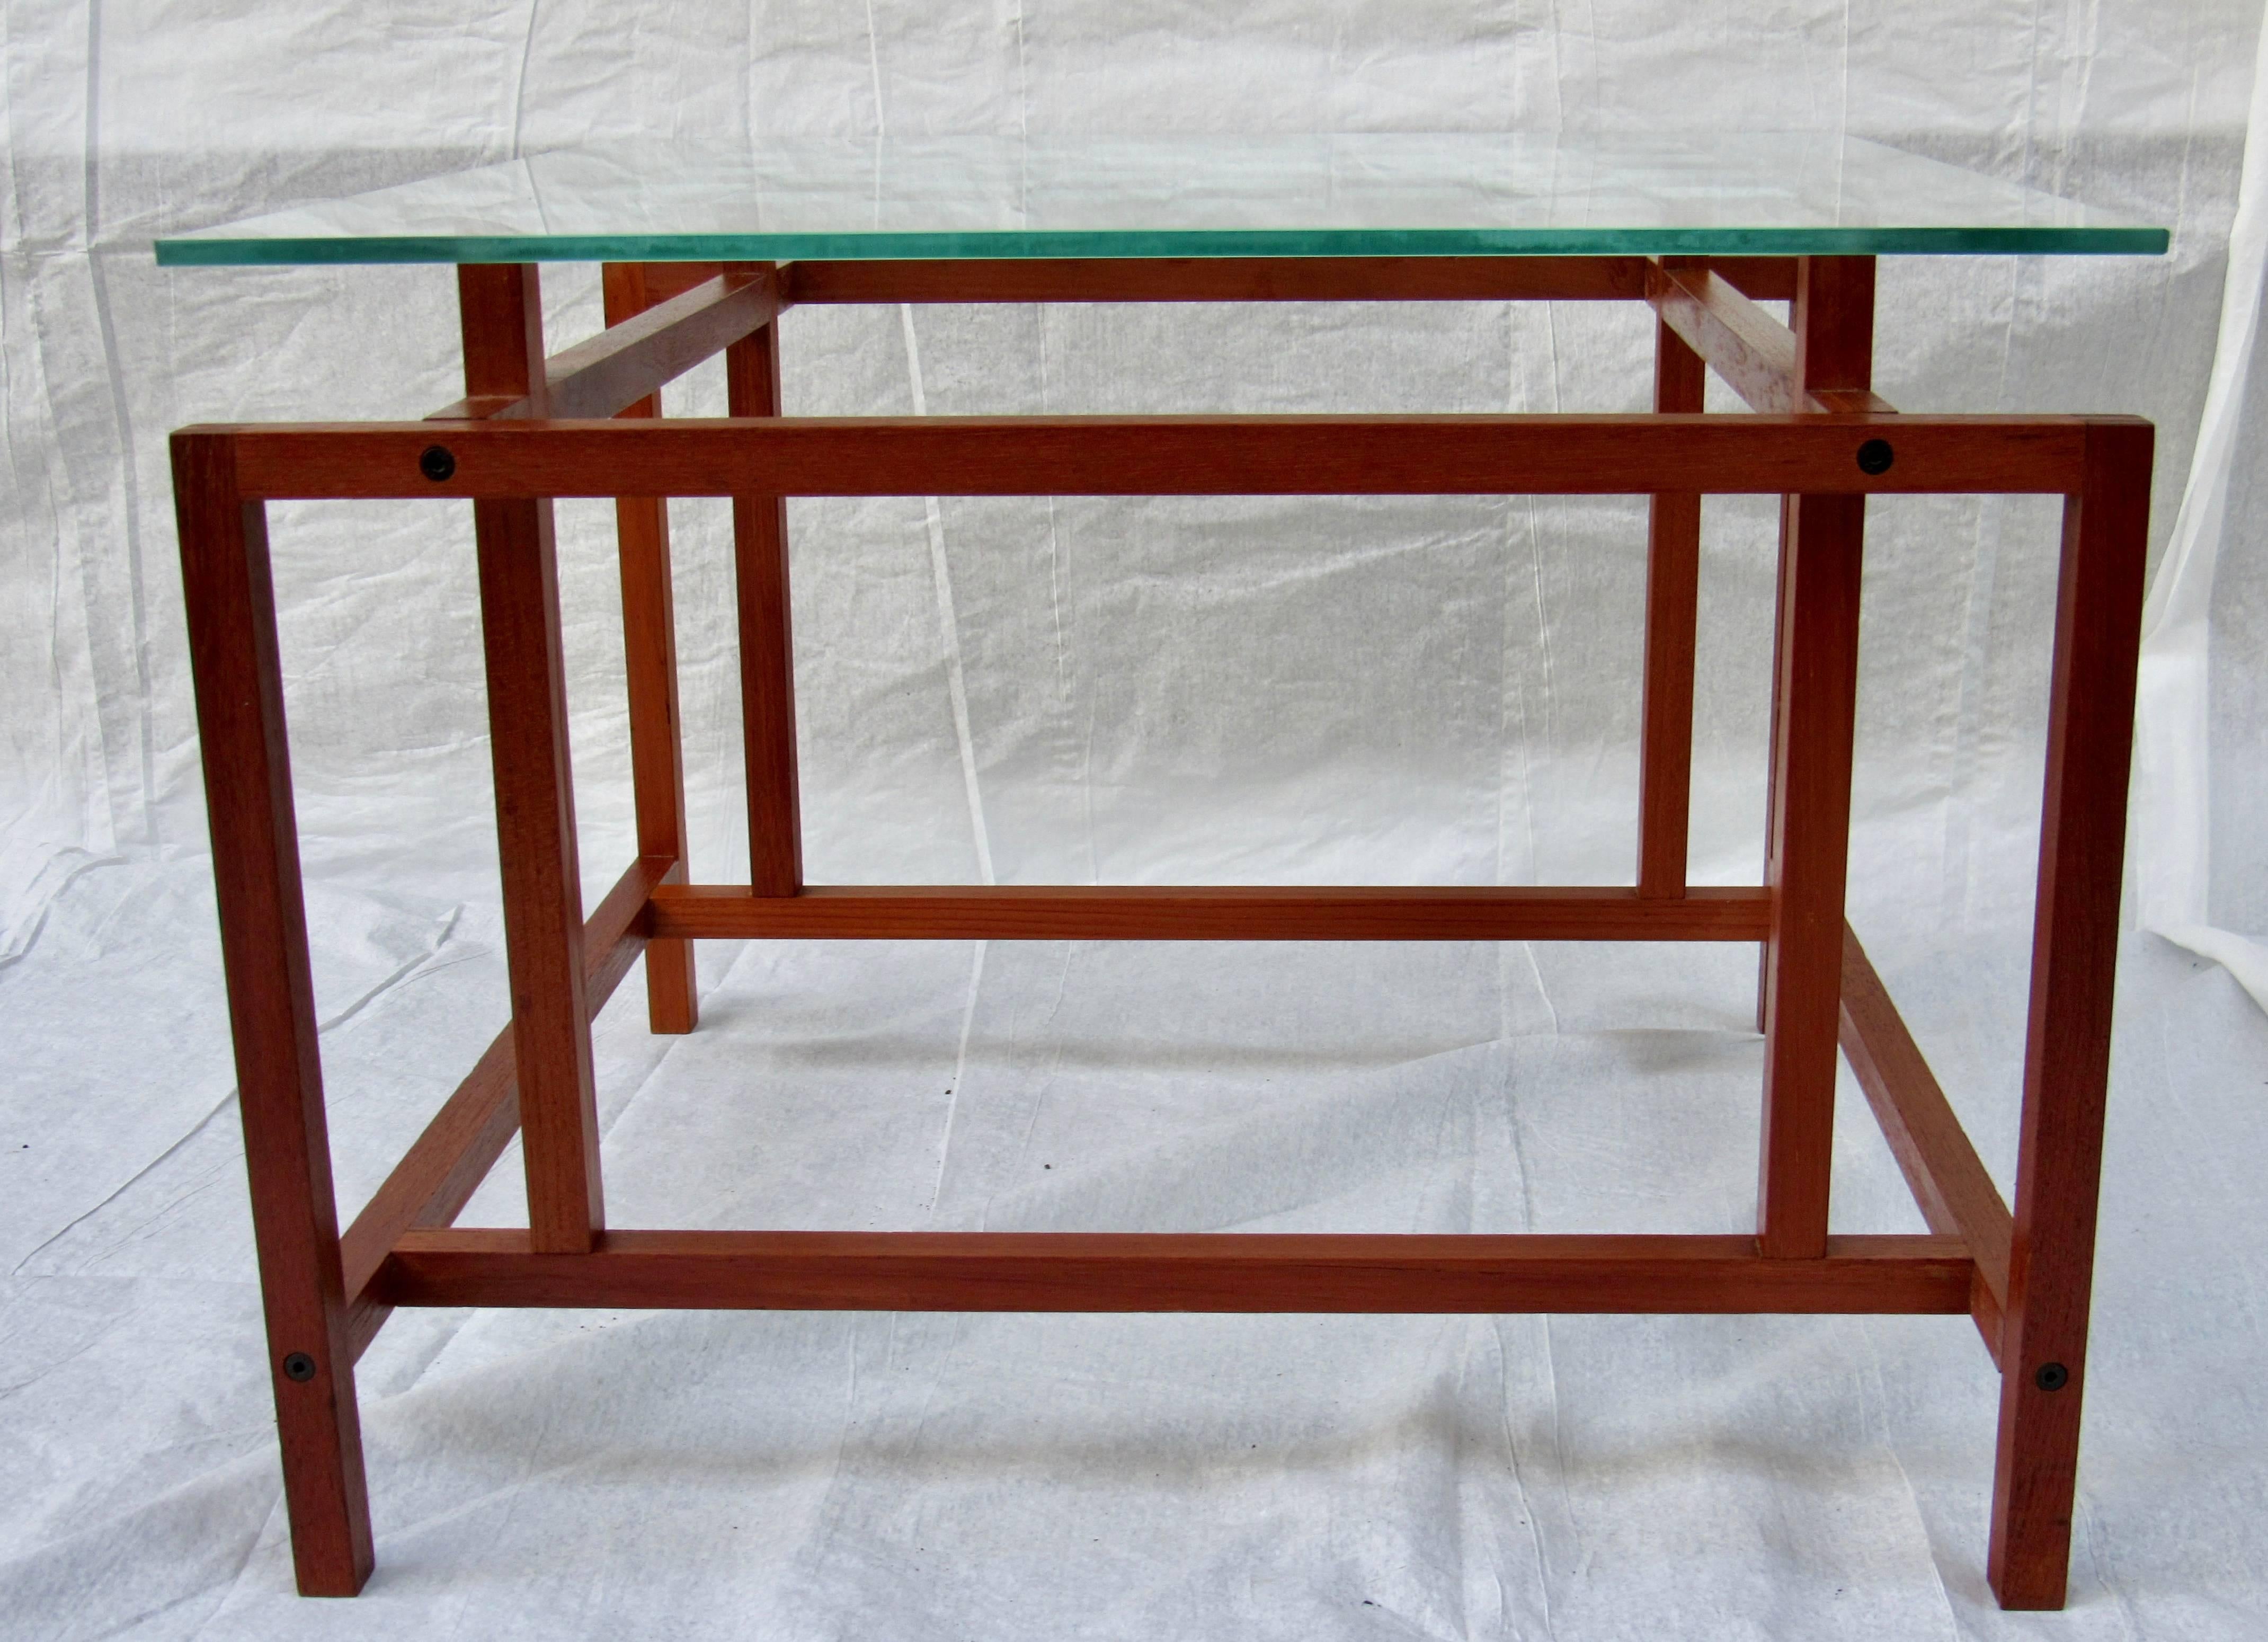 A Henning Norgaard teak end table with the production etched glass game tabletop for Komfort of Denmark from the 1960s.
The table is in excellent vintage condition.
 